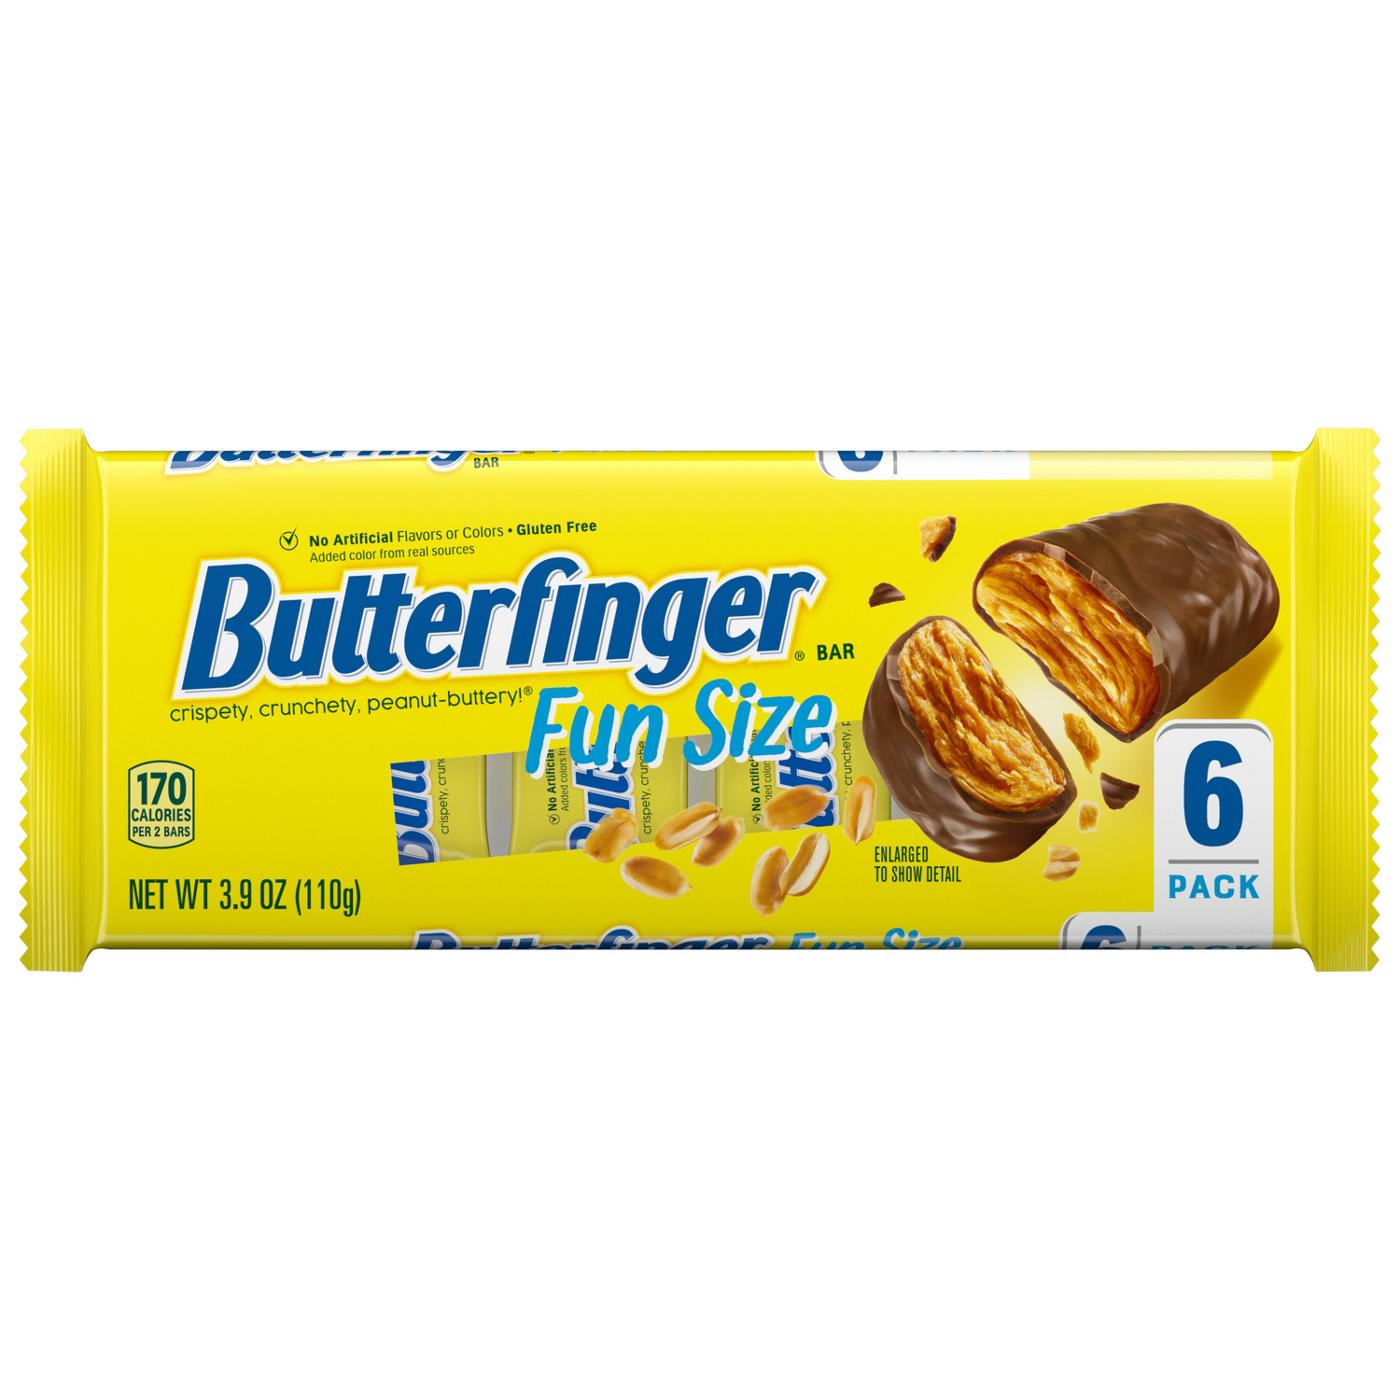 Butterfinger Fun Size Candy Bars; image 1 of 3